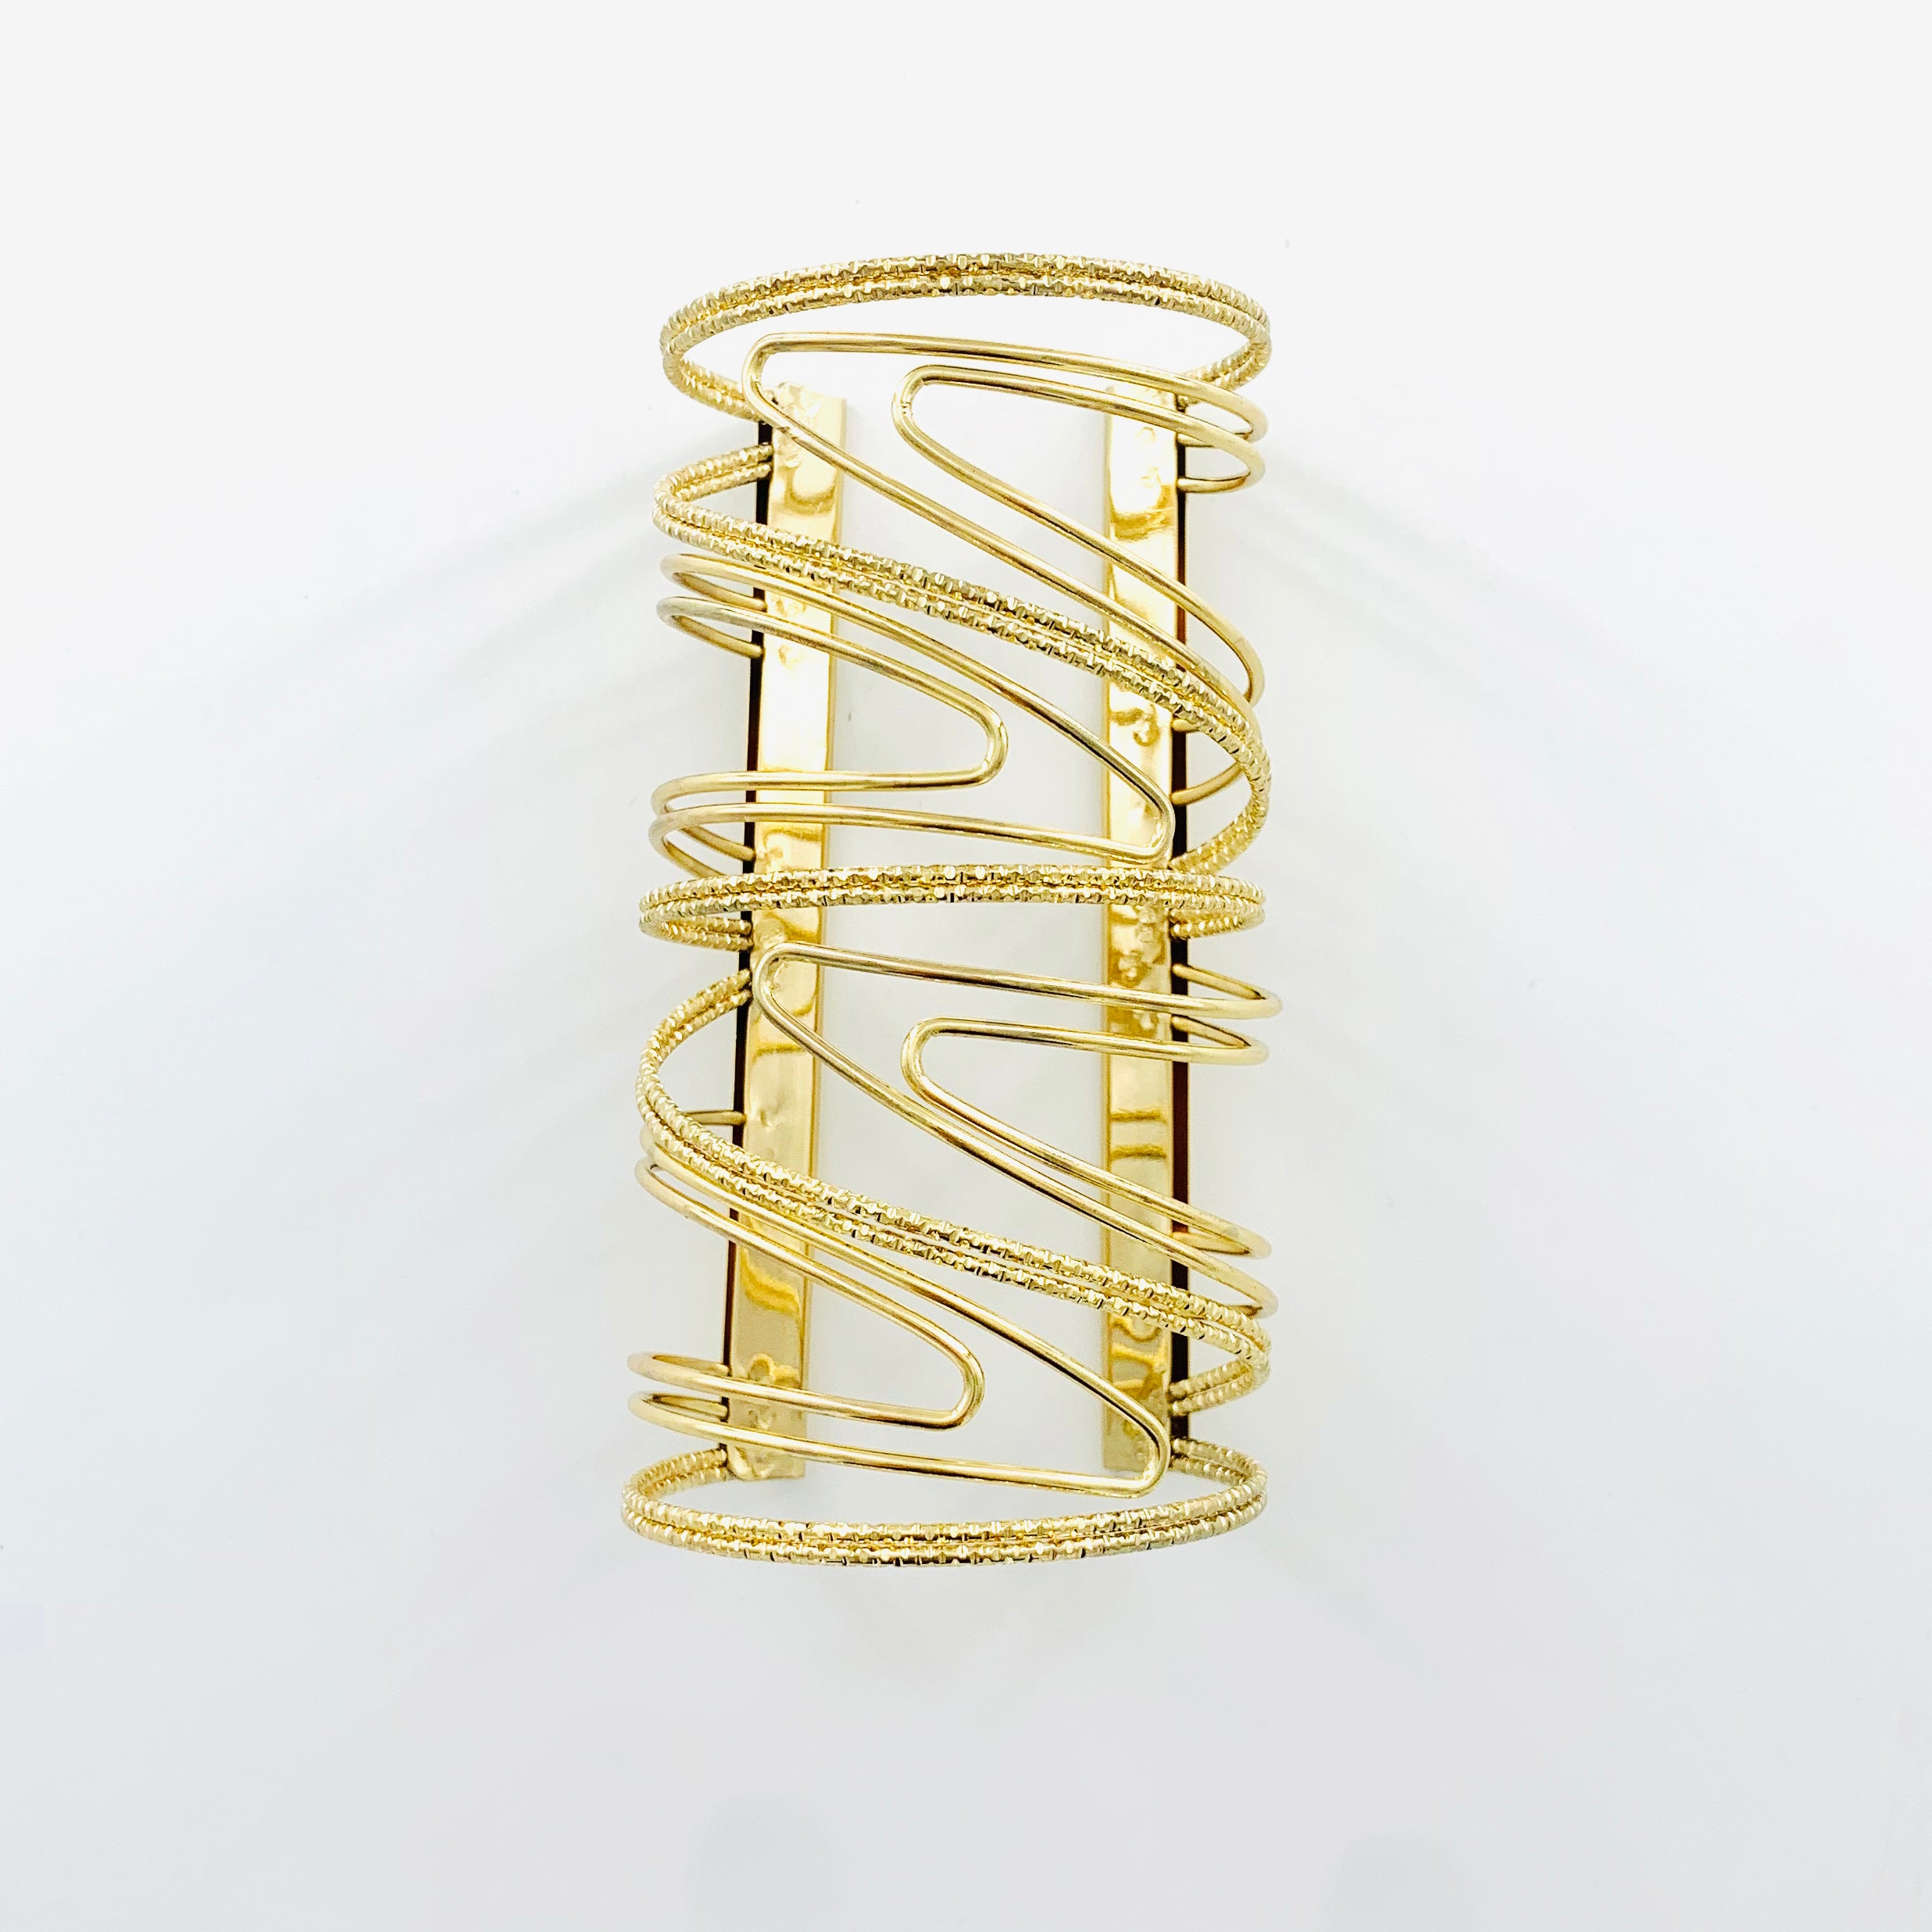 Wide cuff with wavy design in Gold